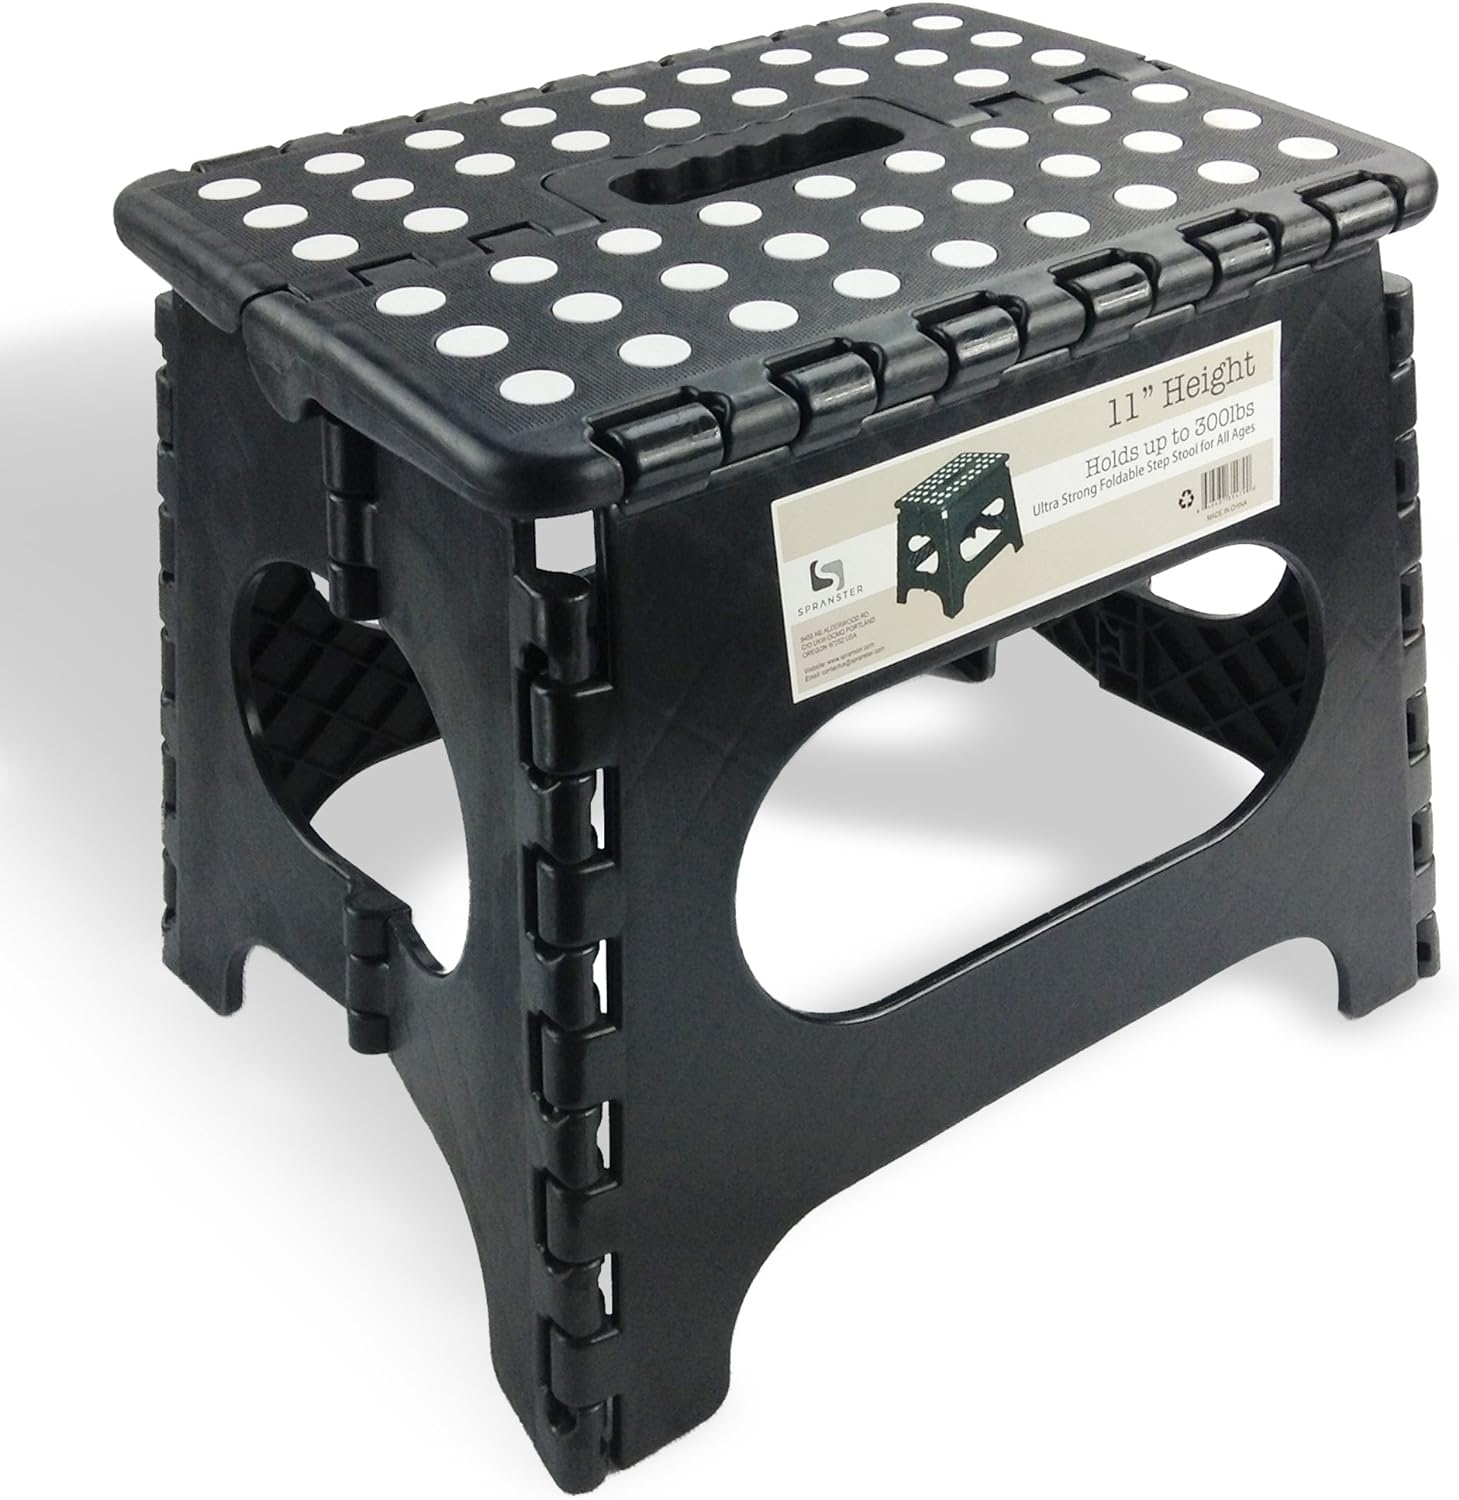 Super Strong Folding Step Stool - 11" Height - Holds up to 300 Lb - The lightweight foldable step stool is sturdy enough to support adults & safe enough for kids. Skid resistant and open with one flip